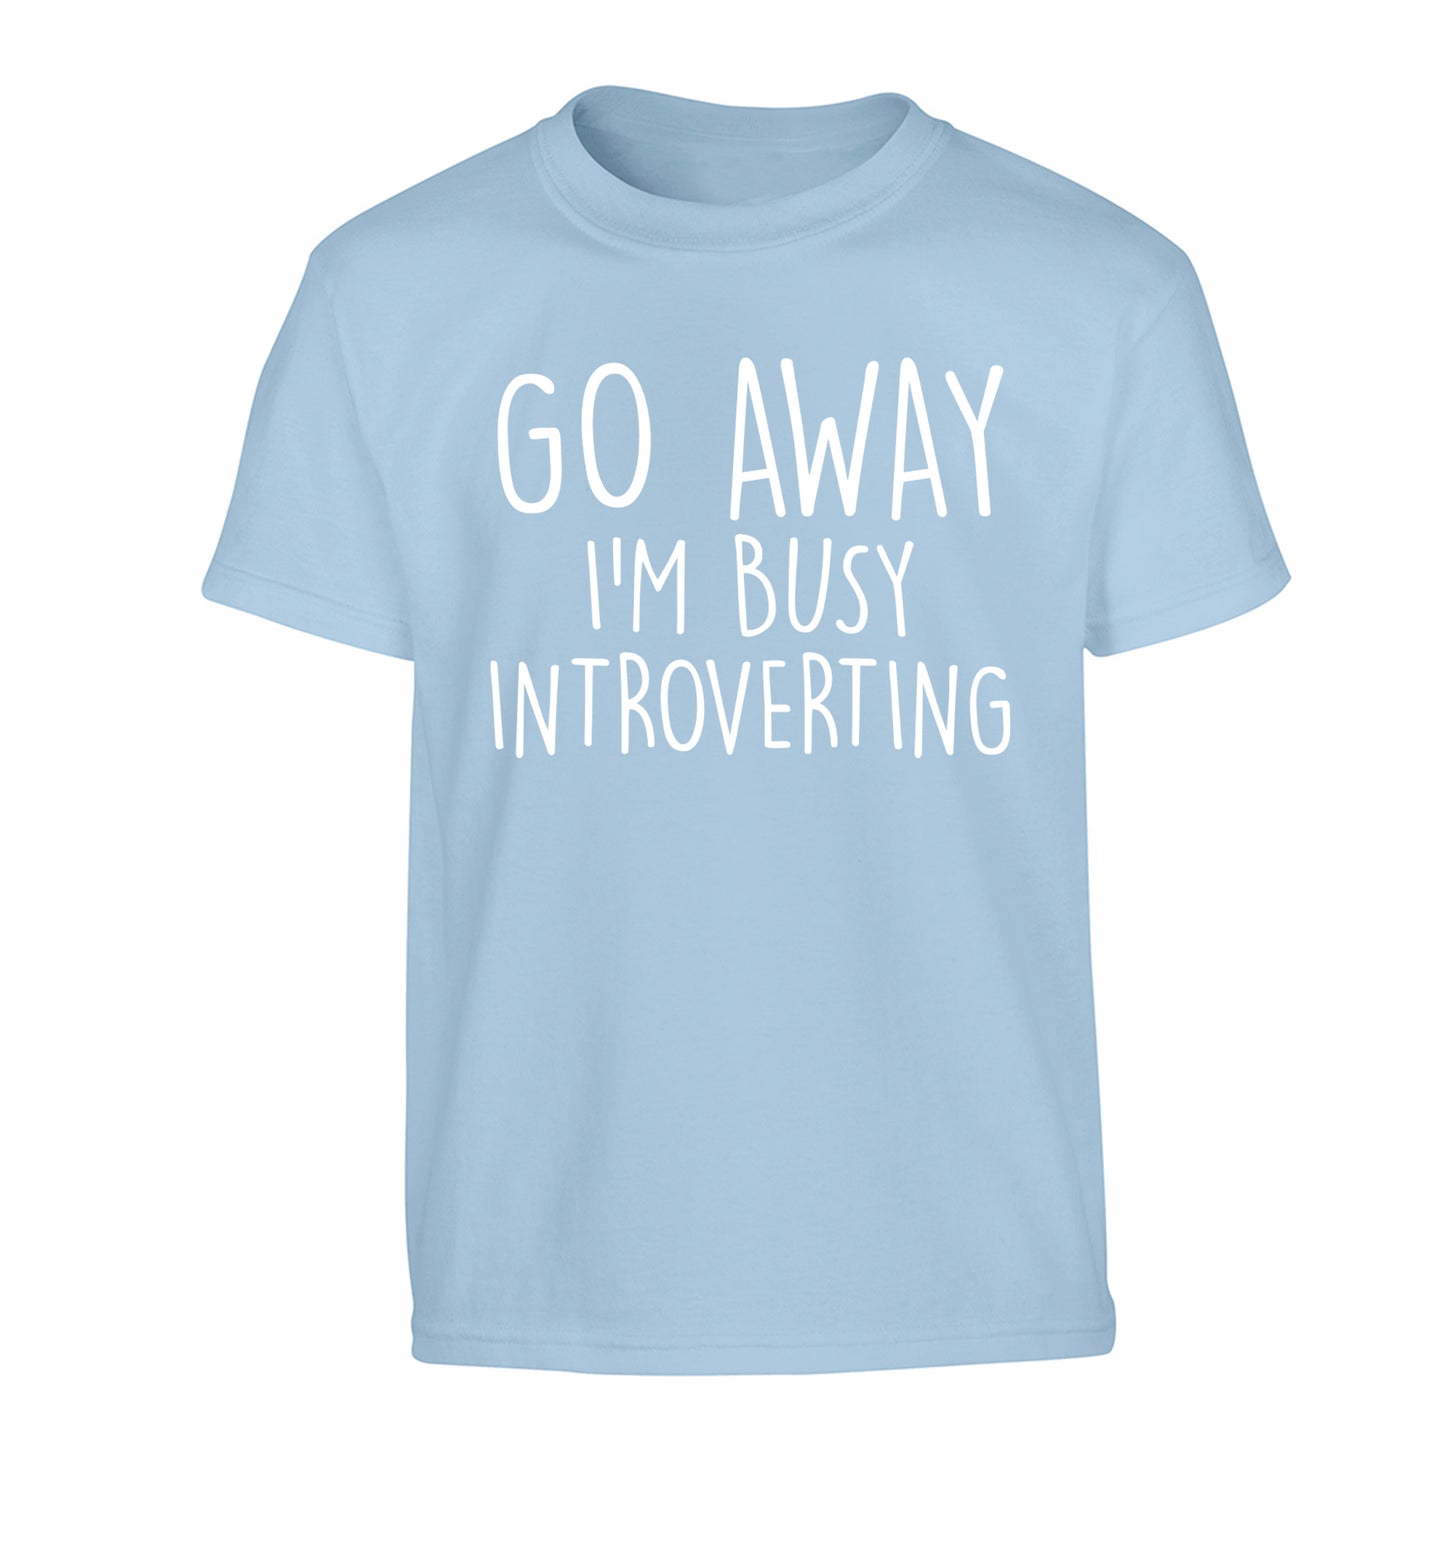 Go away I'm busy introverting Children's light blue Tshirt 12-13 Years